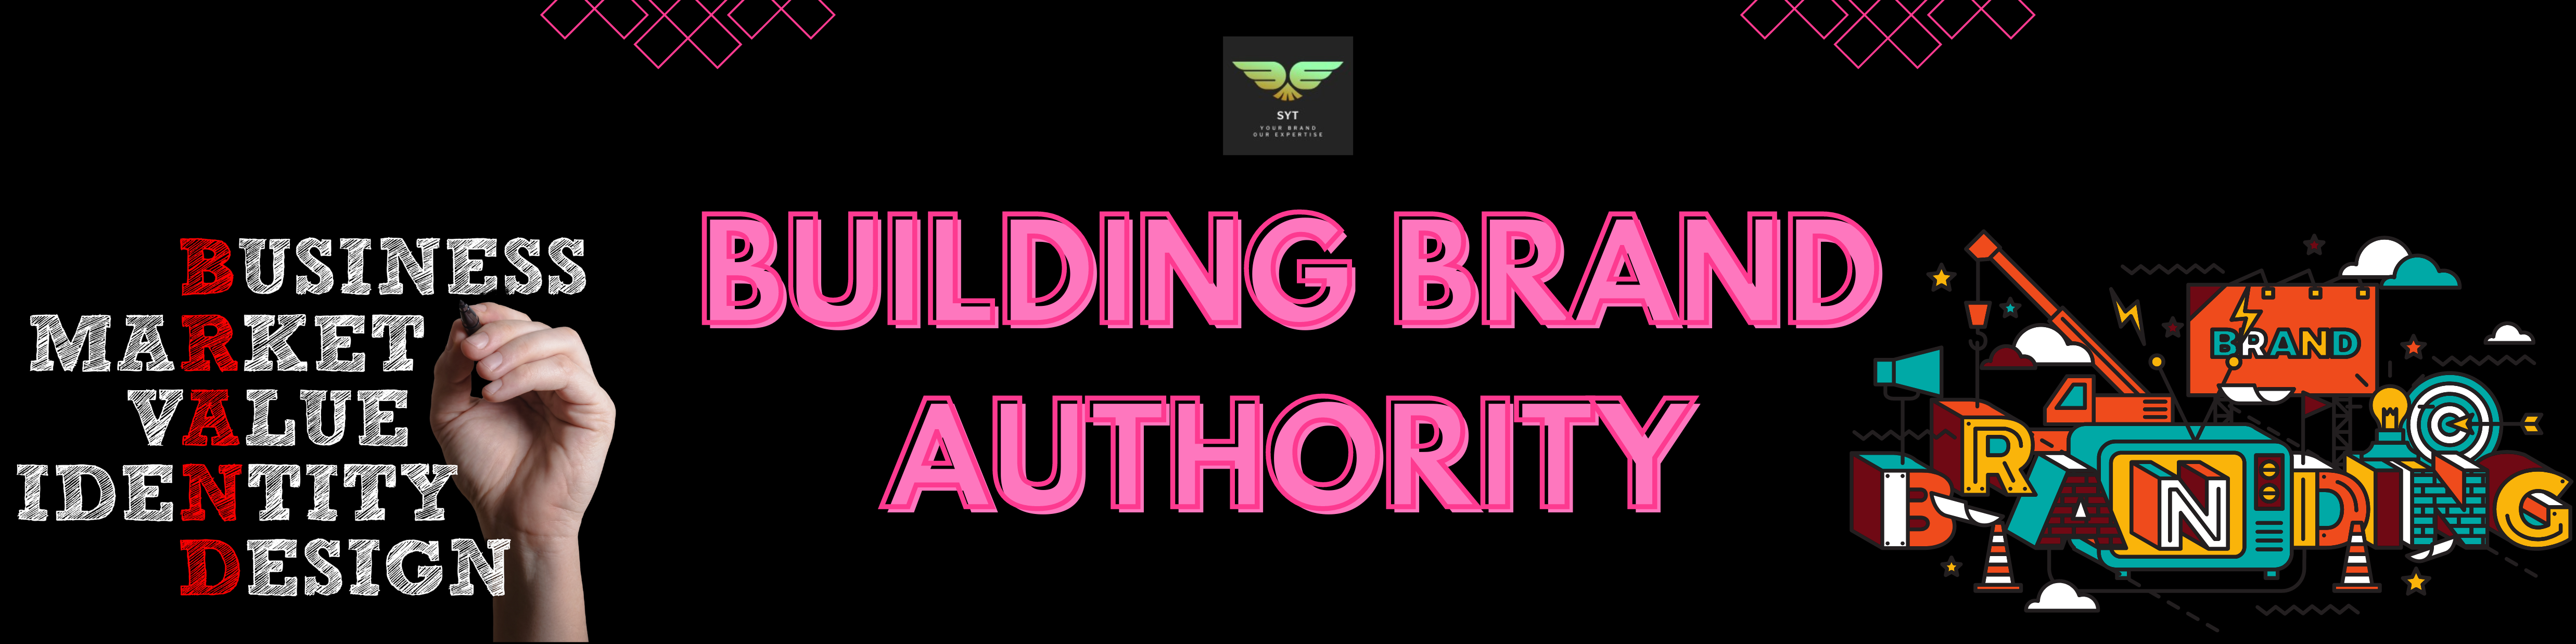 Building Brand Authority: Establishing Credibility and Trust in the Market